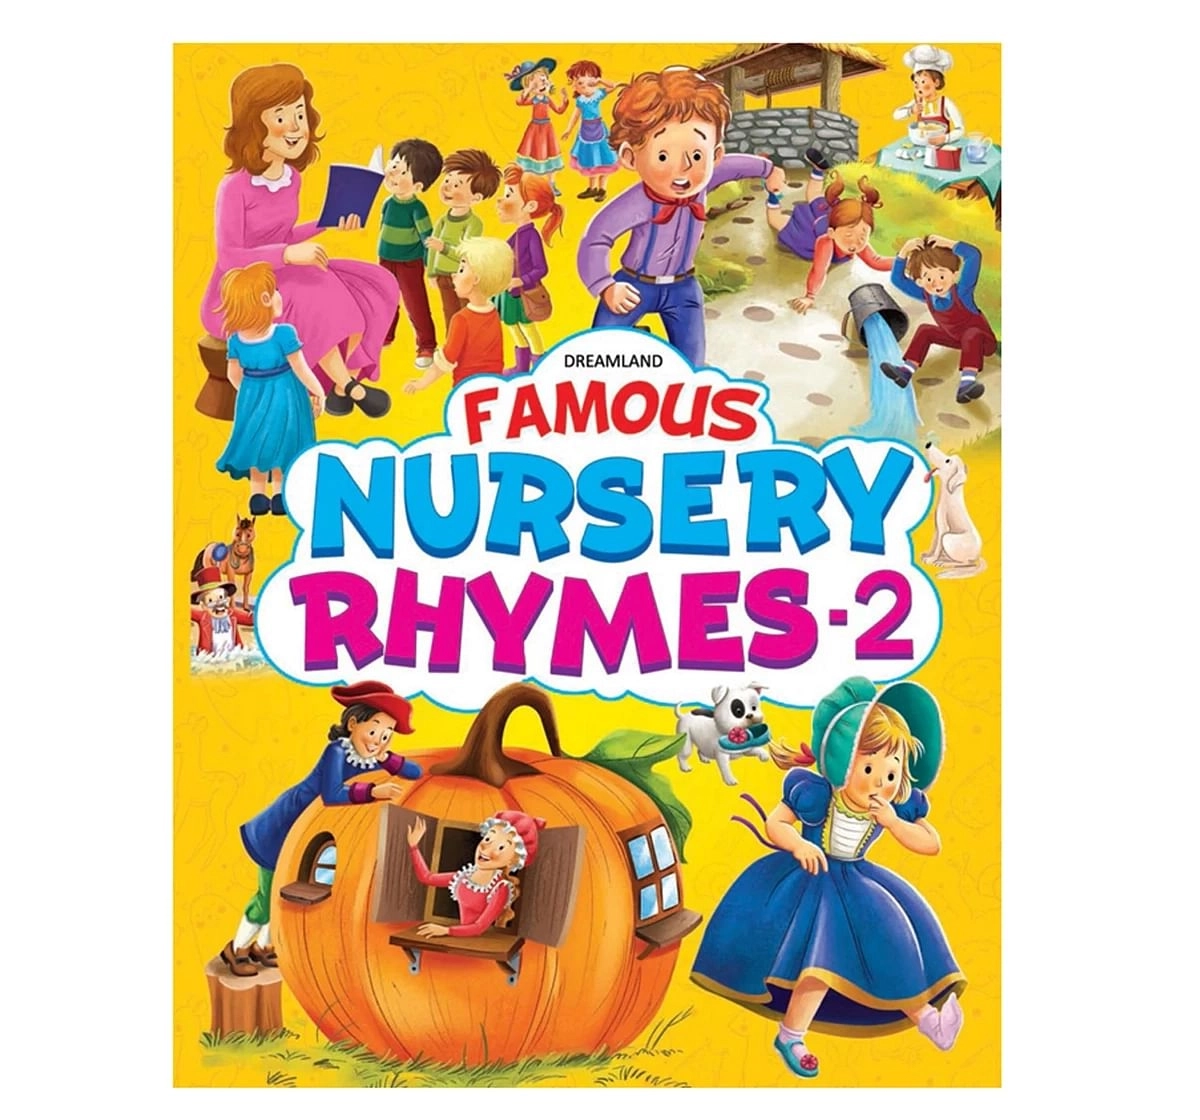 Dreamland Paper Back Famous Nursery Rhymes Part 2 Early Learning Book for kids 3Y+, Multicolour